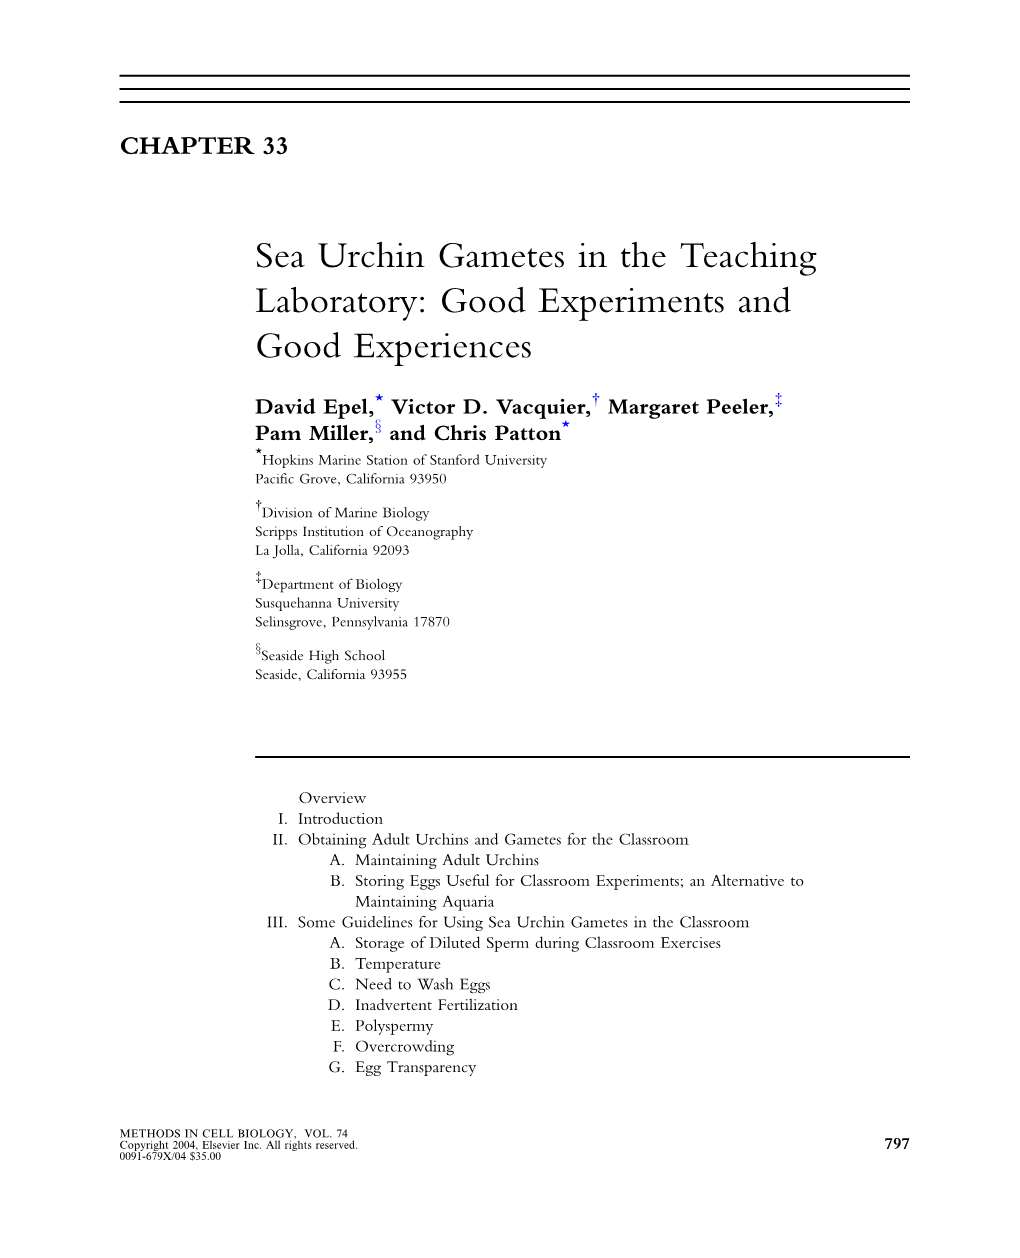 Sea Urchin Gametes in the Teaching Laboratory: Good Experiments and Good Experiences